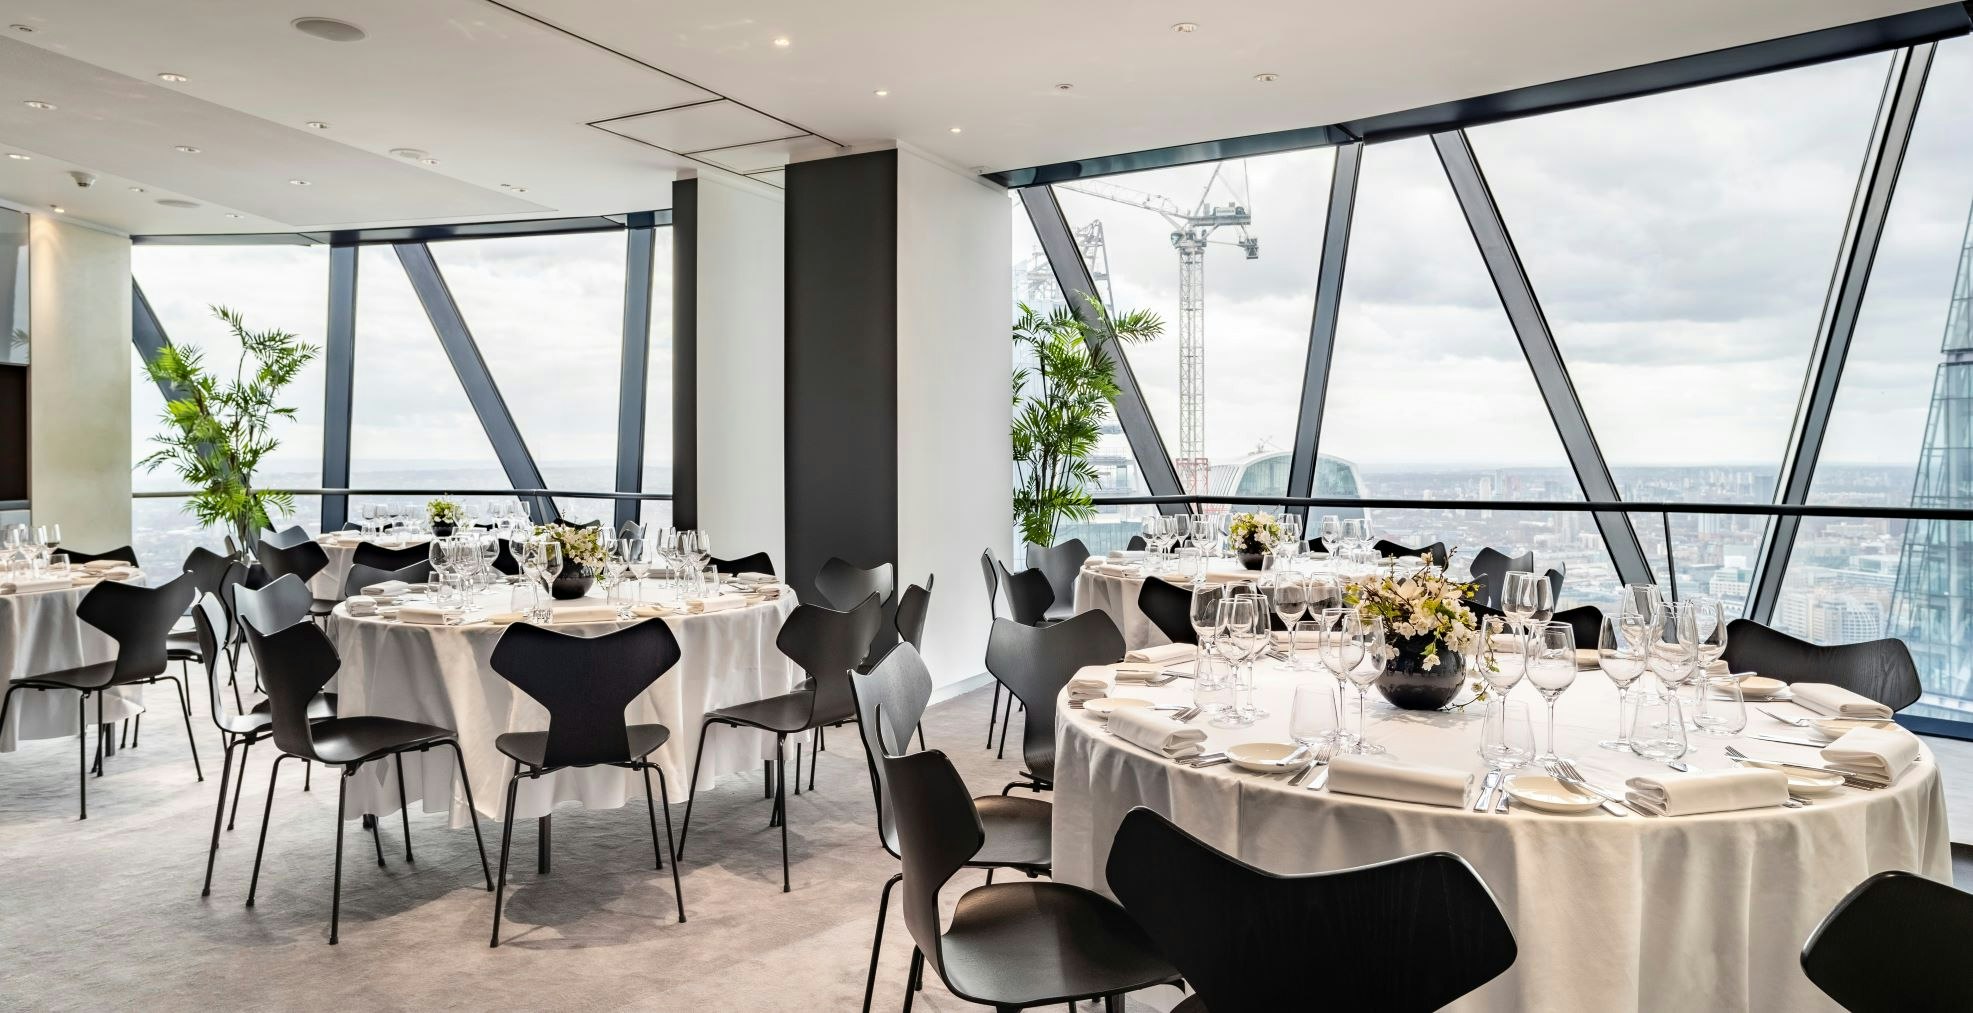 Filming Venues in London - Searcys at the Gherkin